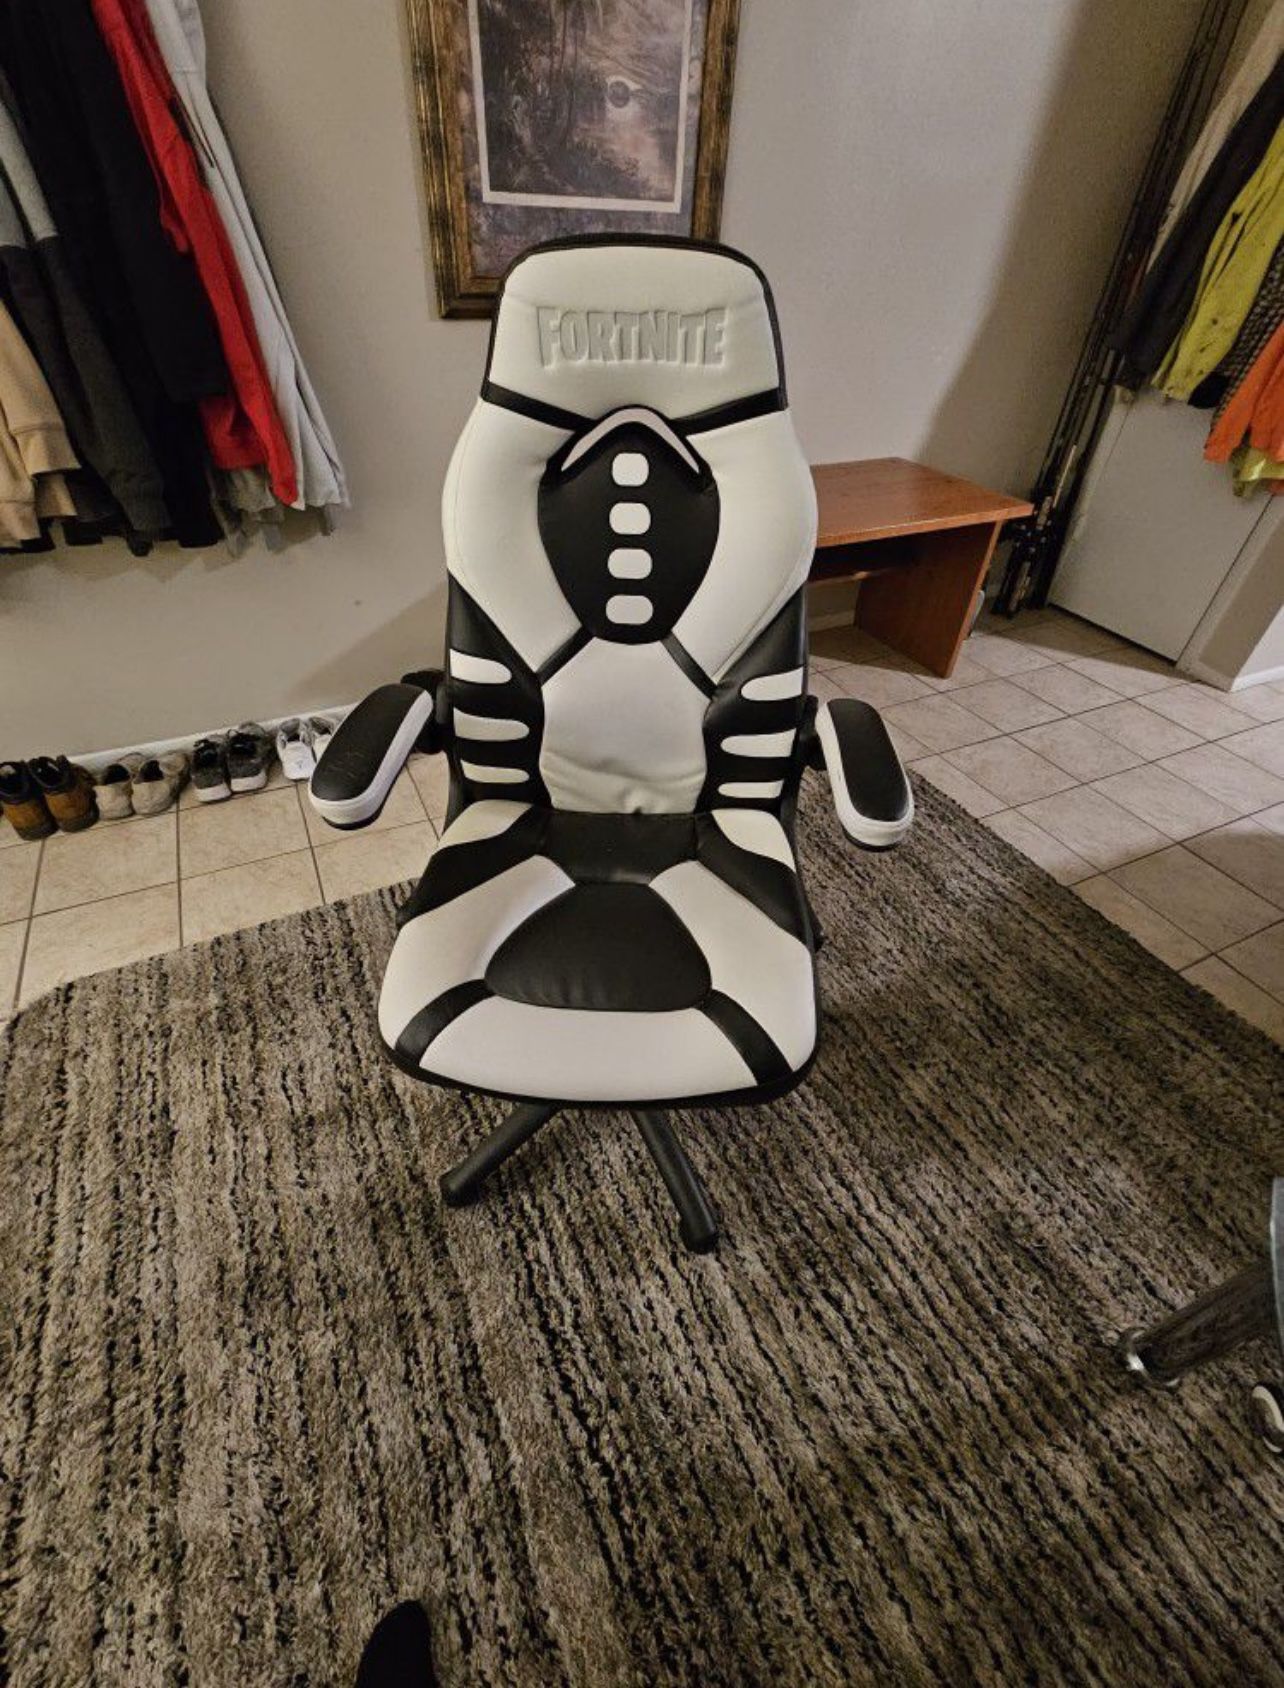 Fortnite Leather Gamining Chair